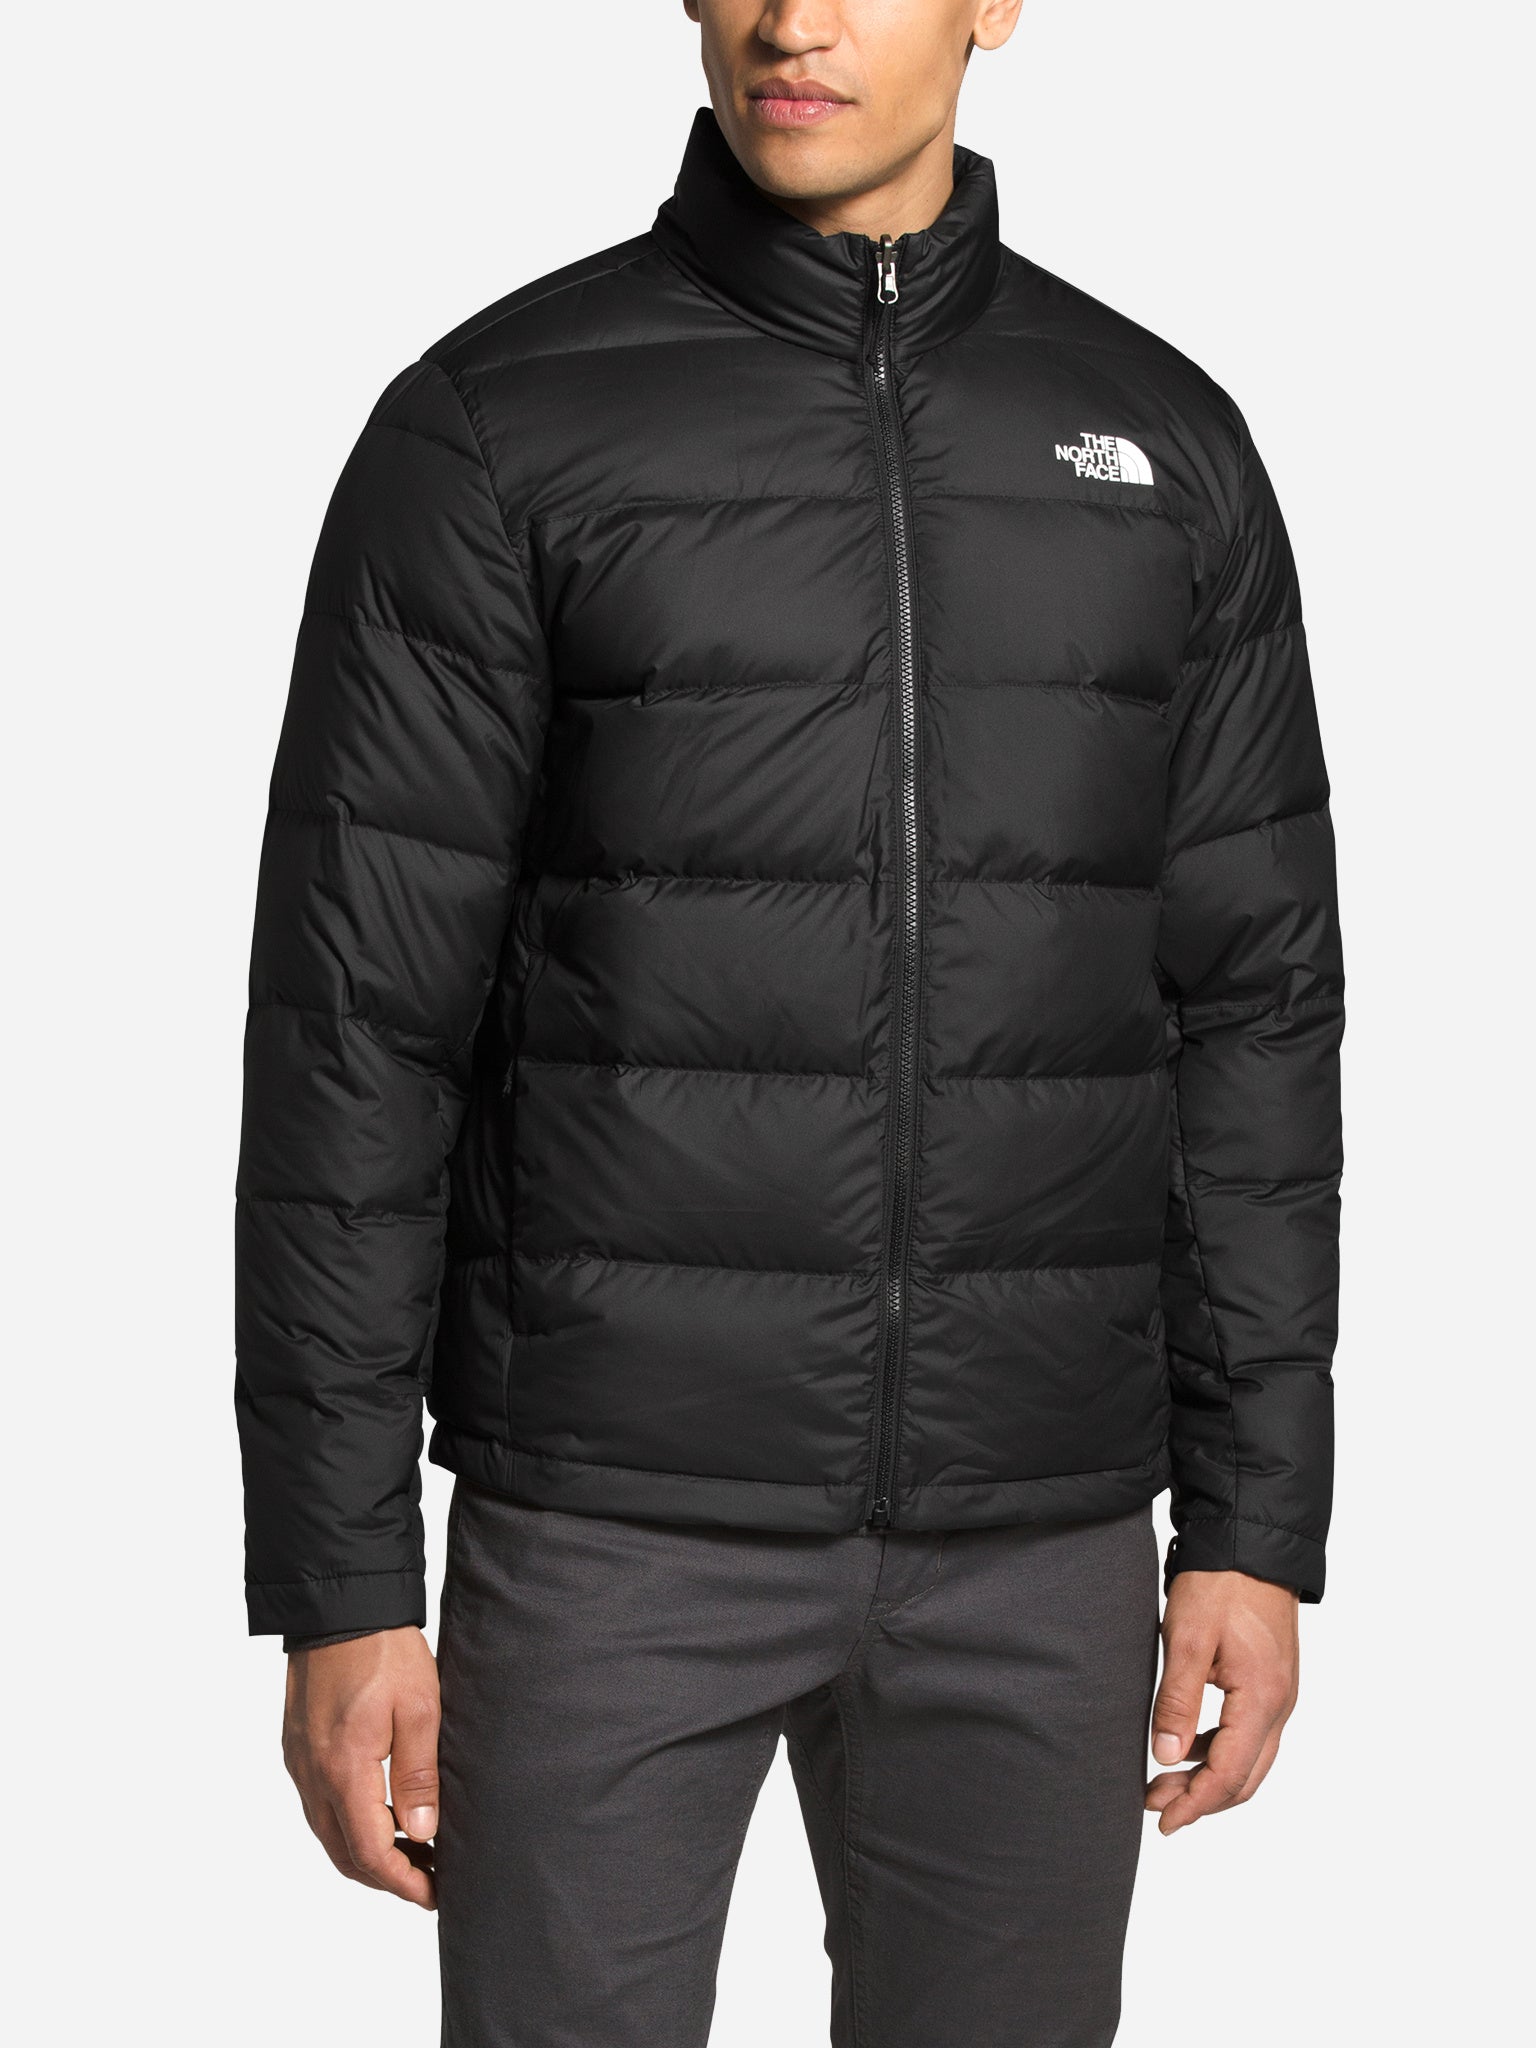 The North Face Men's Mountain Light FUTURELIGHT Triclimate Jacket